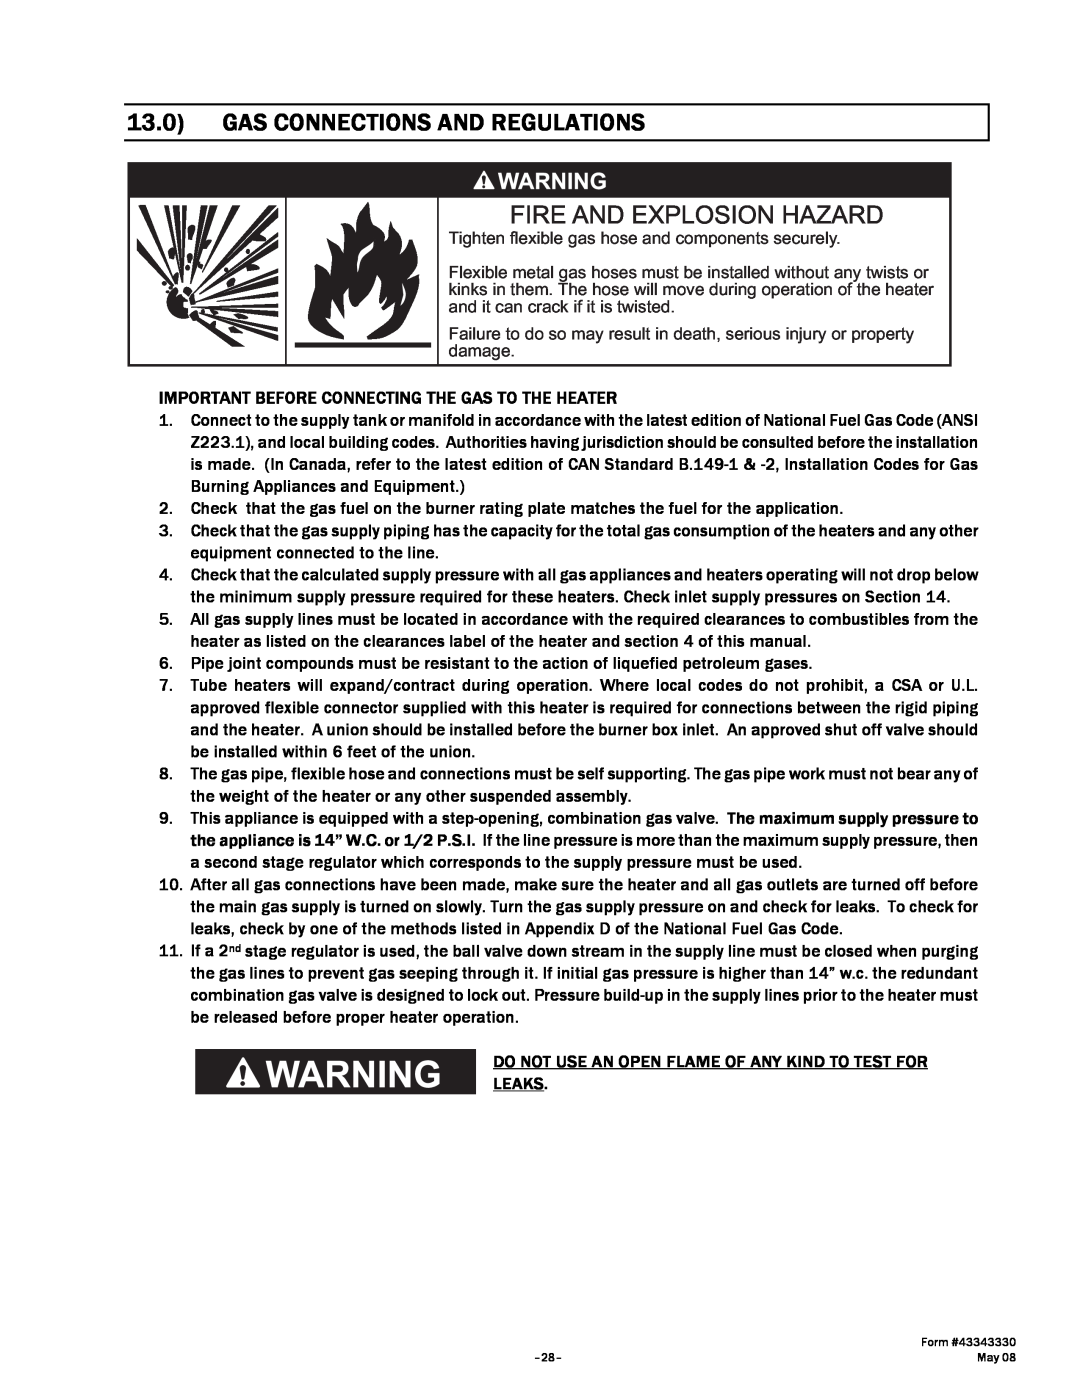 Gas-Fired Products PTU Series manual Gas Connections And Regulations, Important Before Connecting The Gas To The Heater 